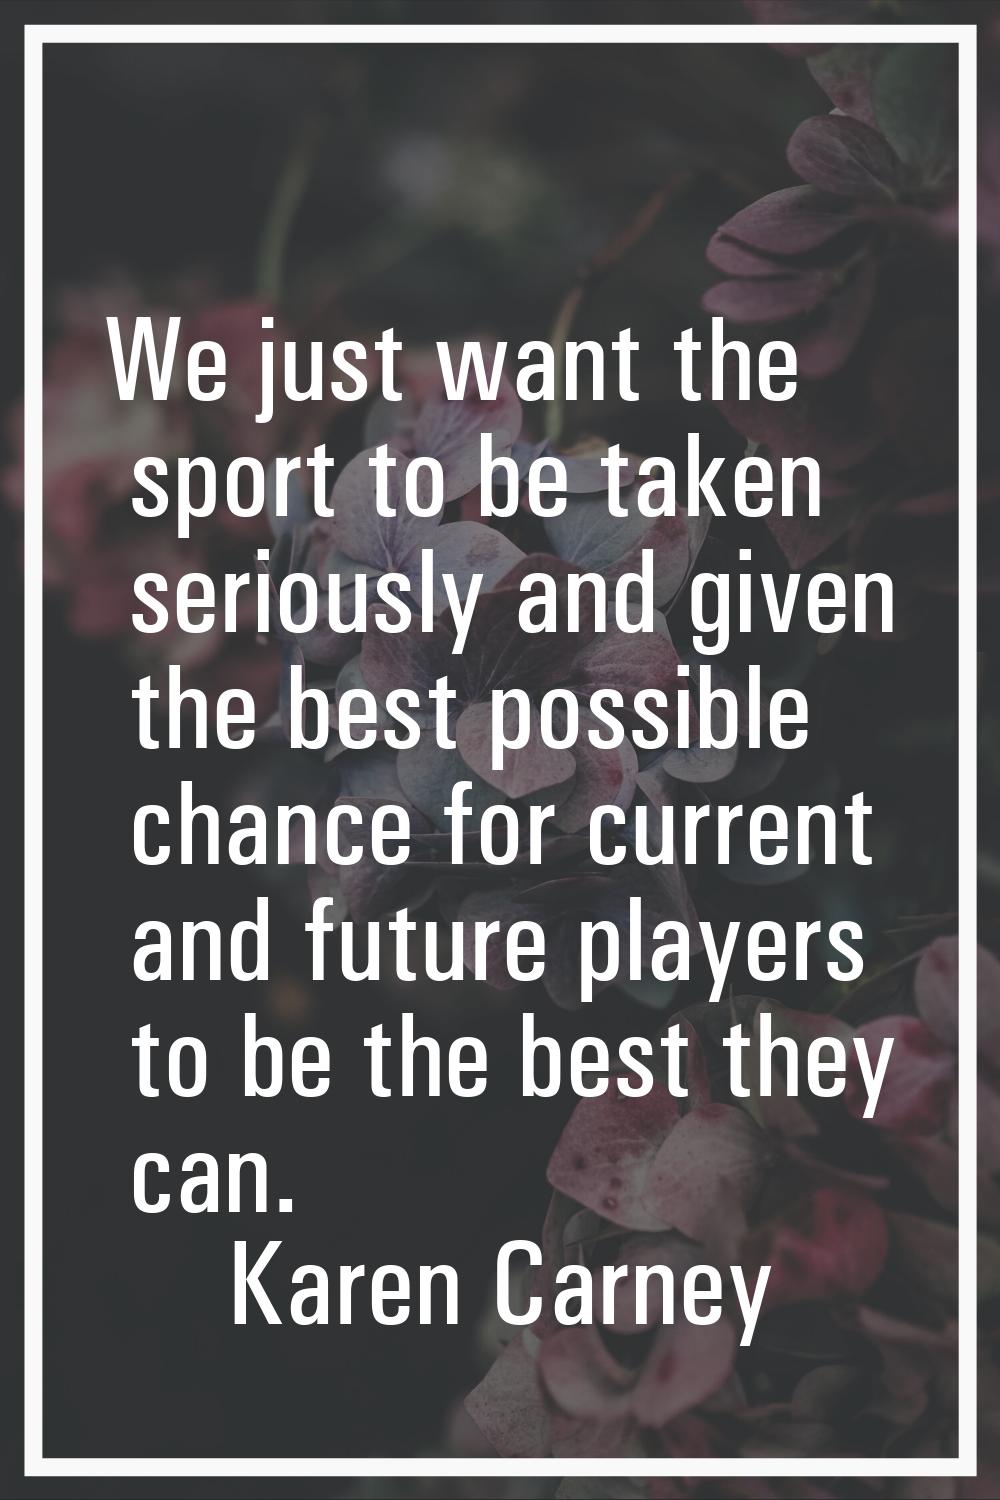 We just want the sport to be taken seriously and given the best possible chance for current and fut